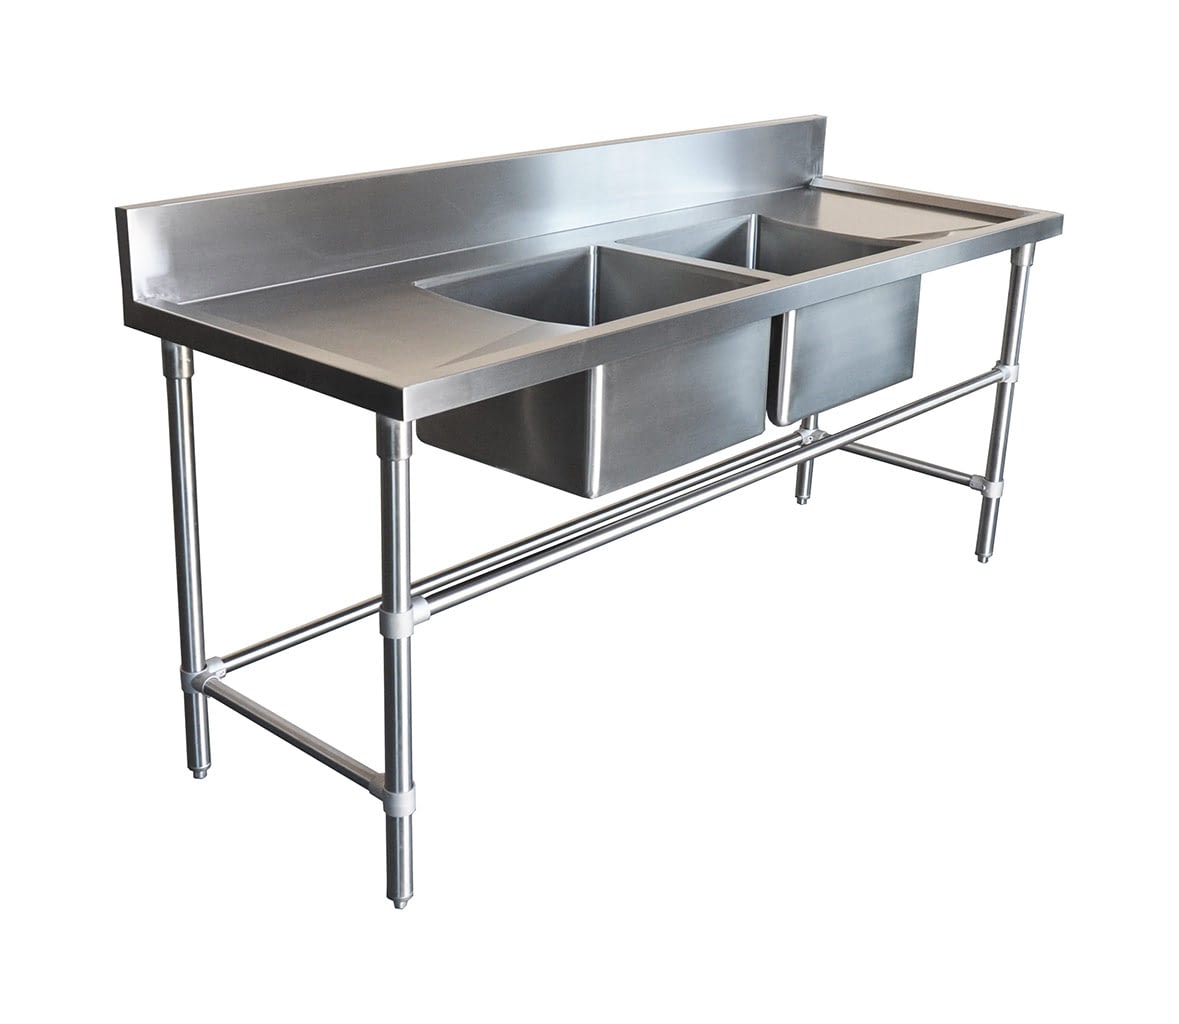 Double Stainless Steel Sink – Right And Left Bench, 2000 x 700 x 900mm high